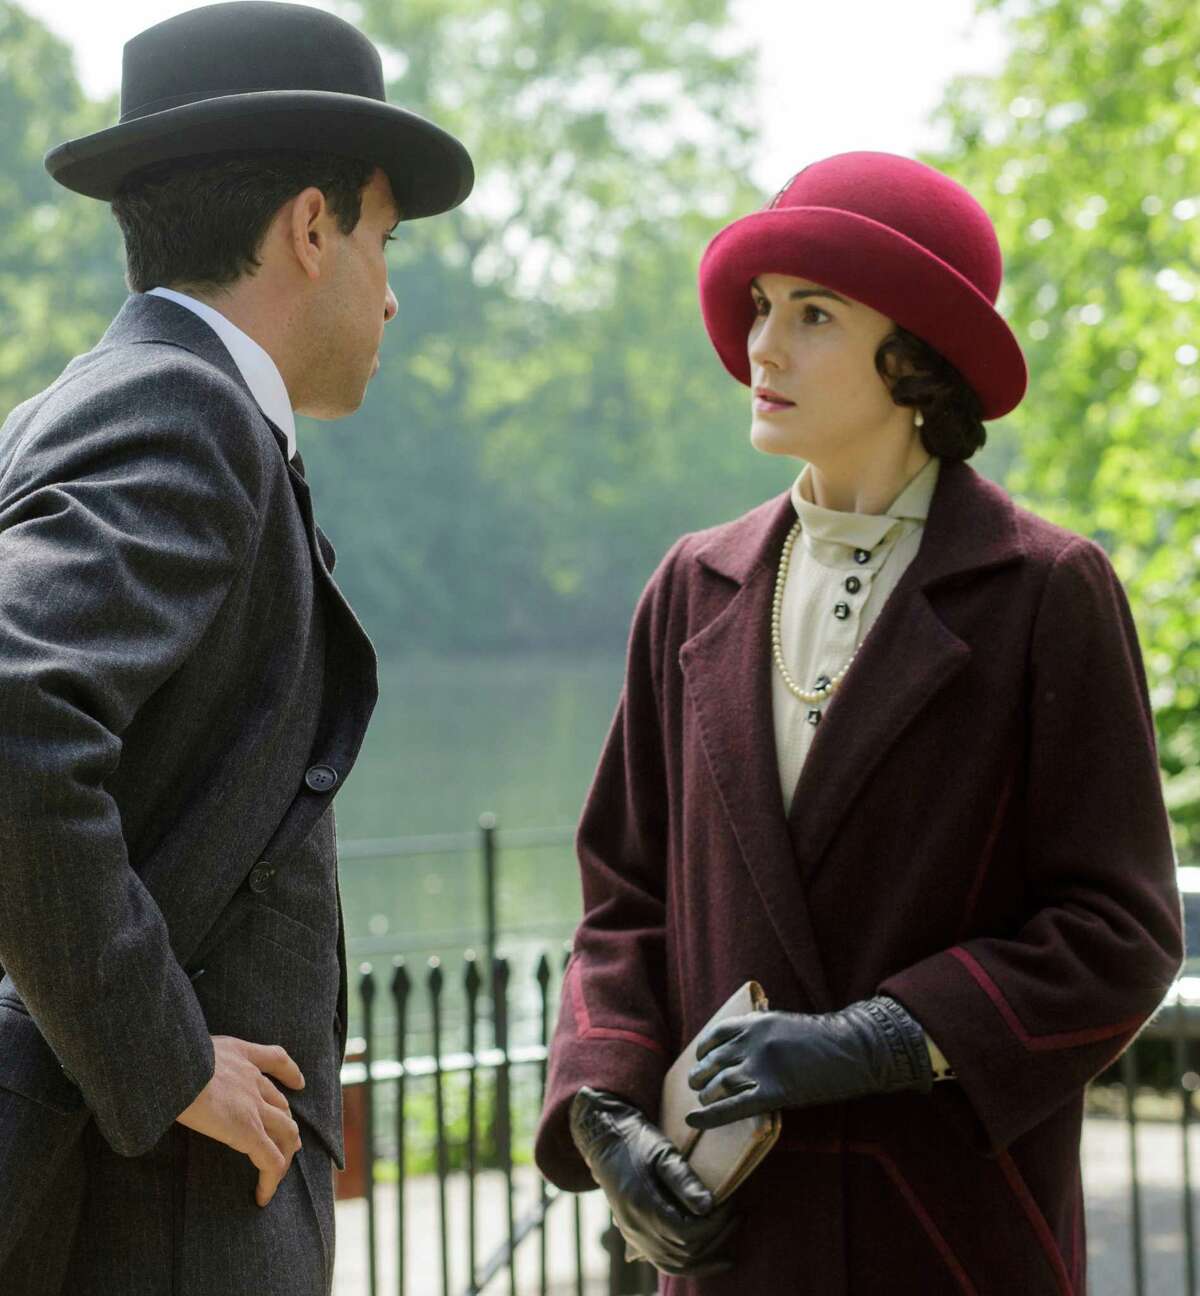 Tom Cullen and Michelle Dockery co-star in the PBS hit, “Downton Abbey,” airing on “Masterpiece Classic.” Series five premieres Sunday. Dockery, who plays Lady Mary Crawley, says she was terrified when she first read the script. (Nick Briggs/Carnival Film for Masterpiece)